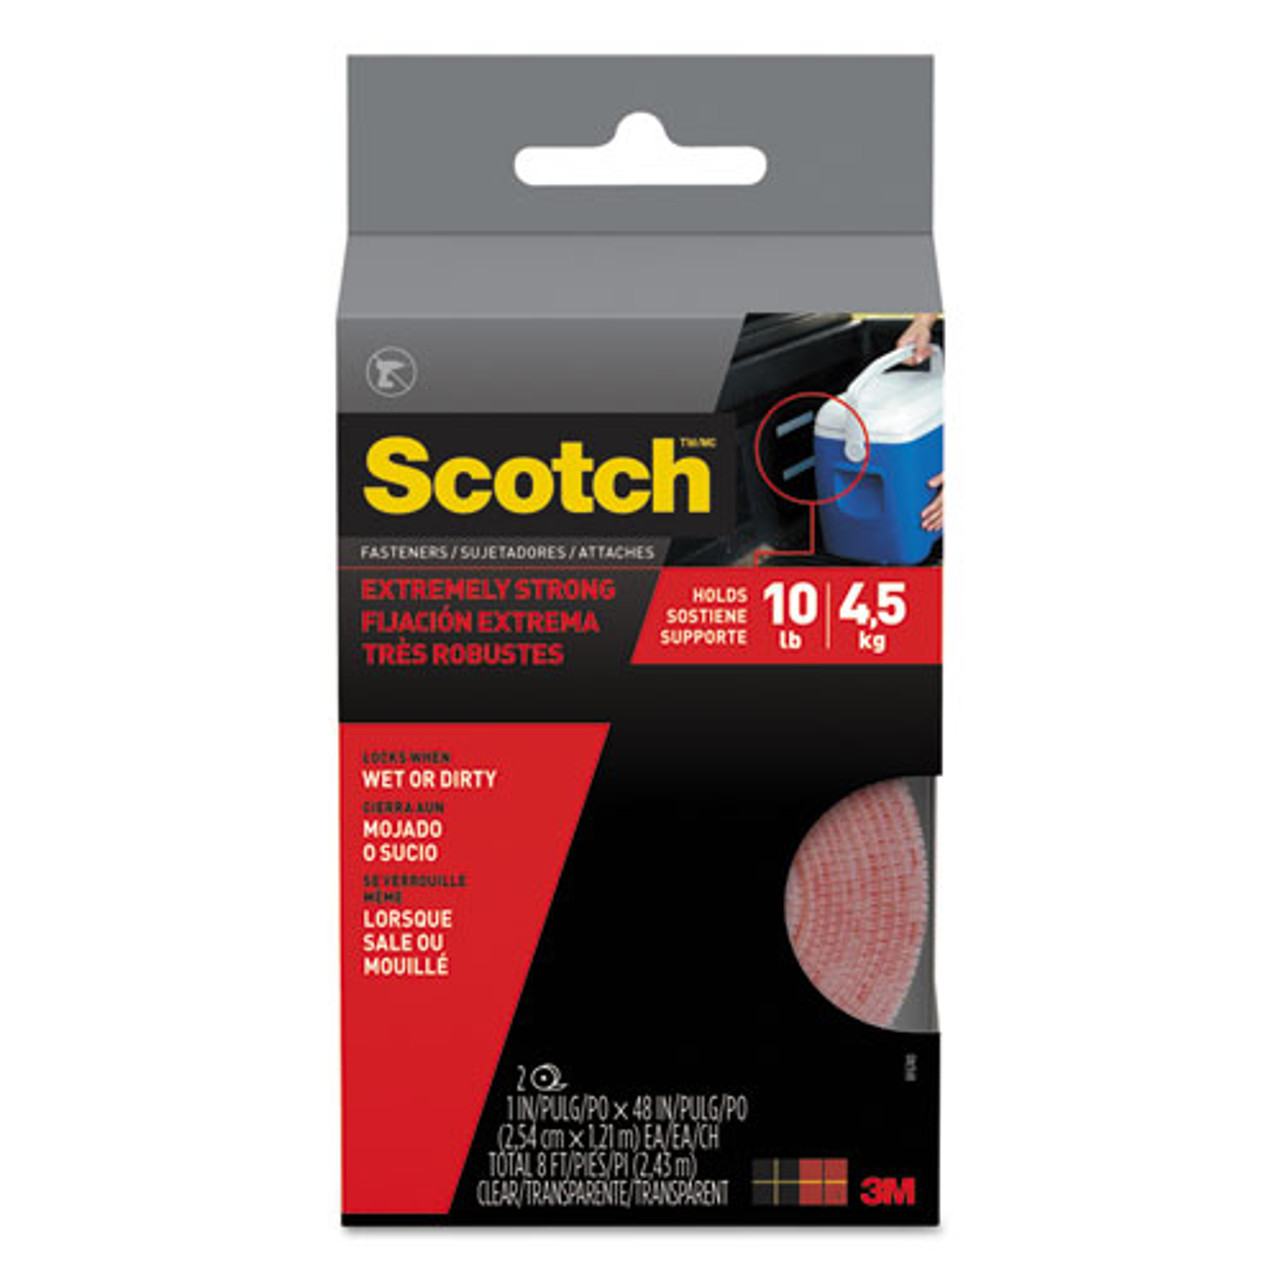 Scotch Wall-Safe Tape with Dispenser 1 Core 0.75 x 54.17 ft Clear 4/Pack